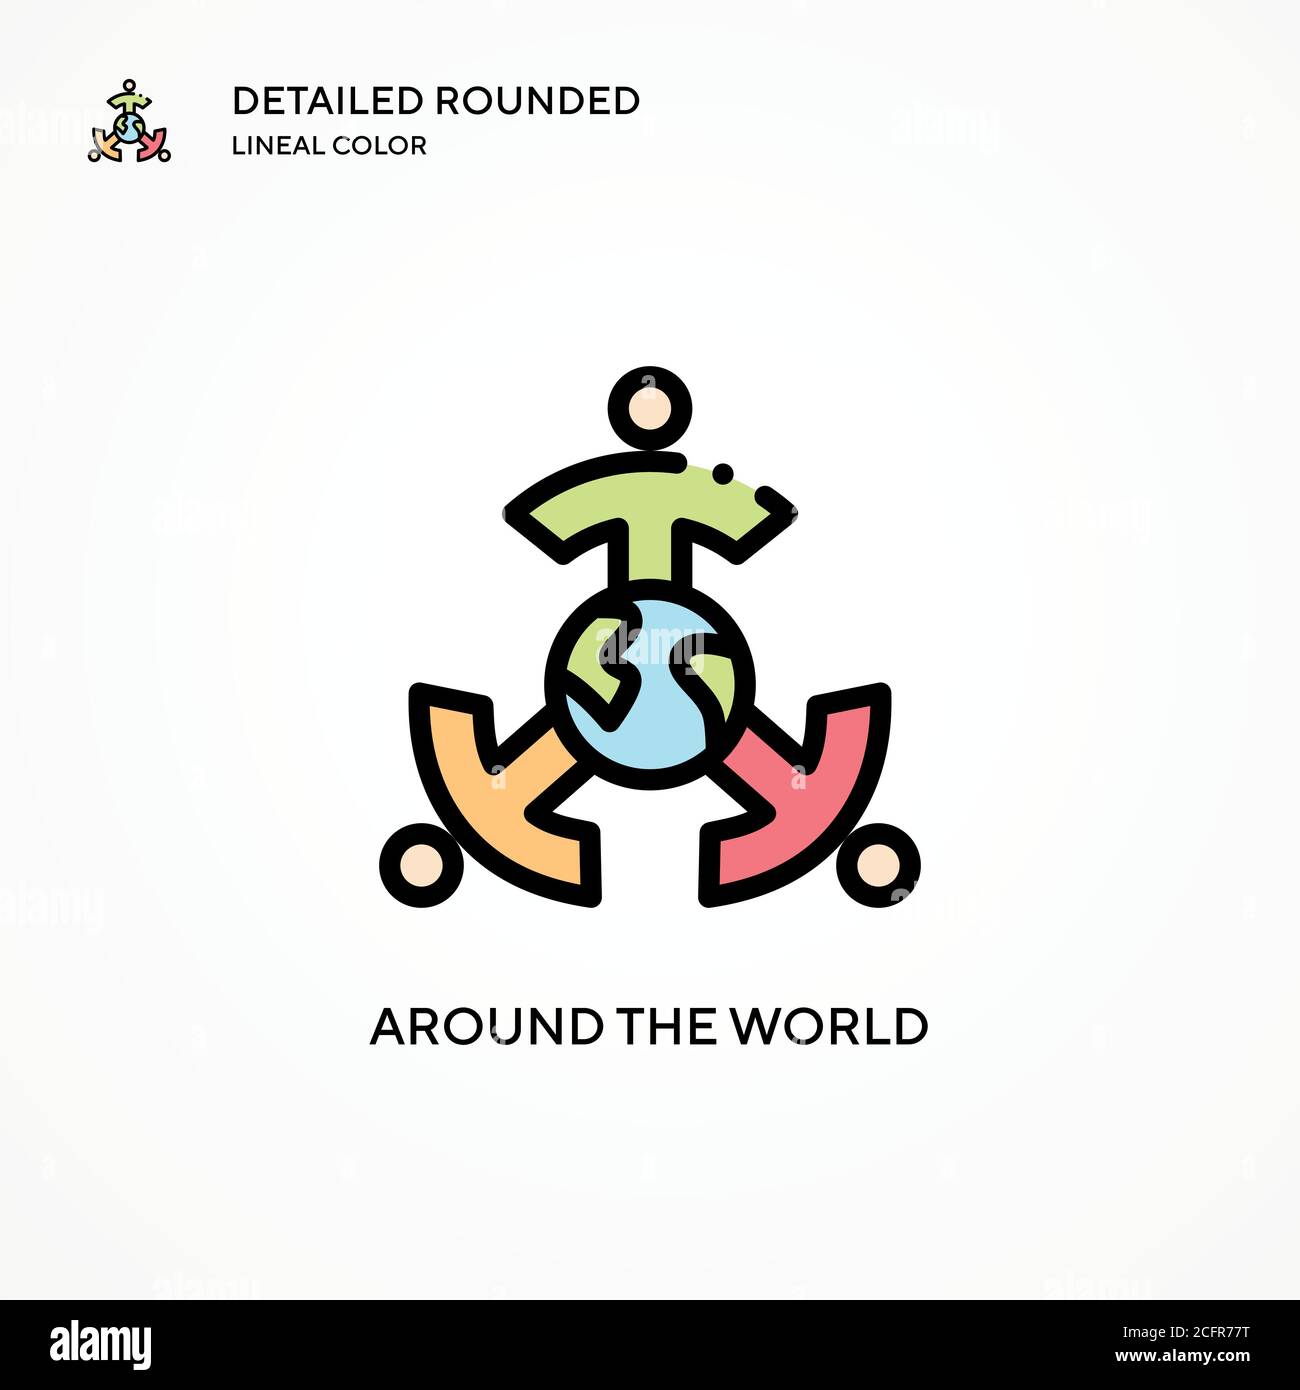 Around the world vector icon. Modern vector illustration concepts. Easy to edit and customize. Stock Vector